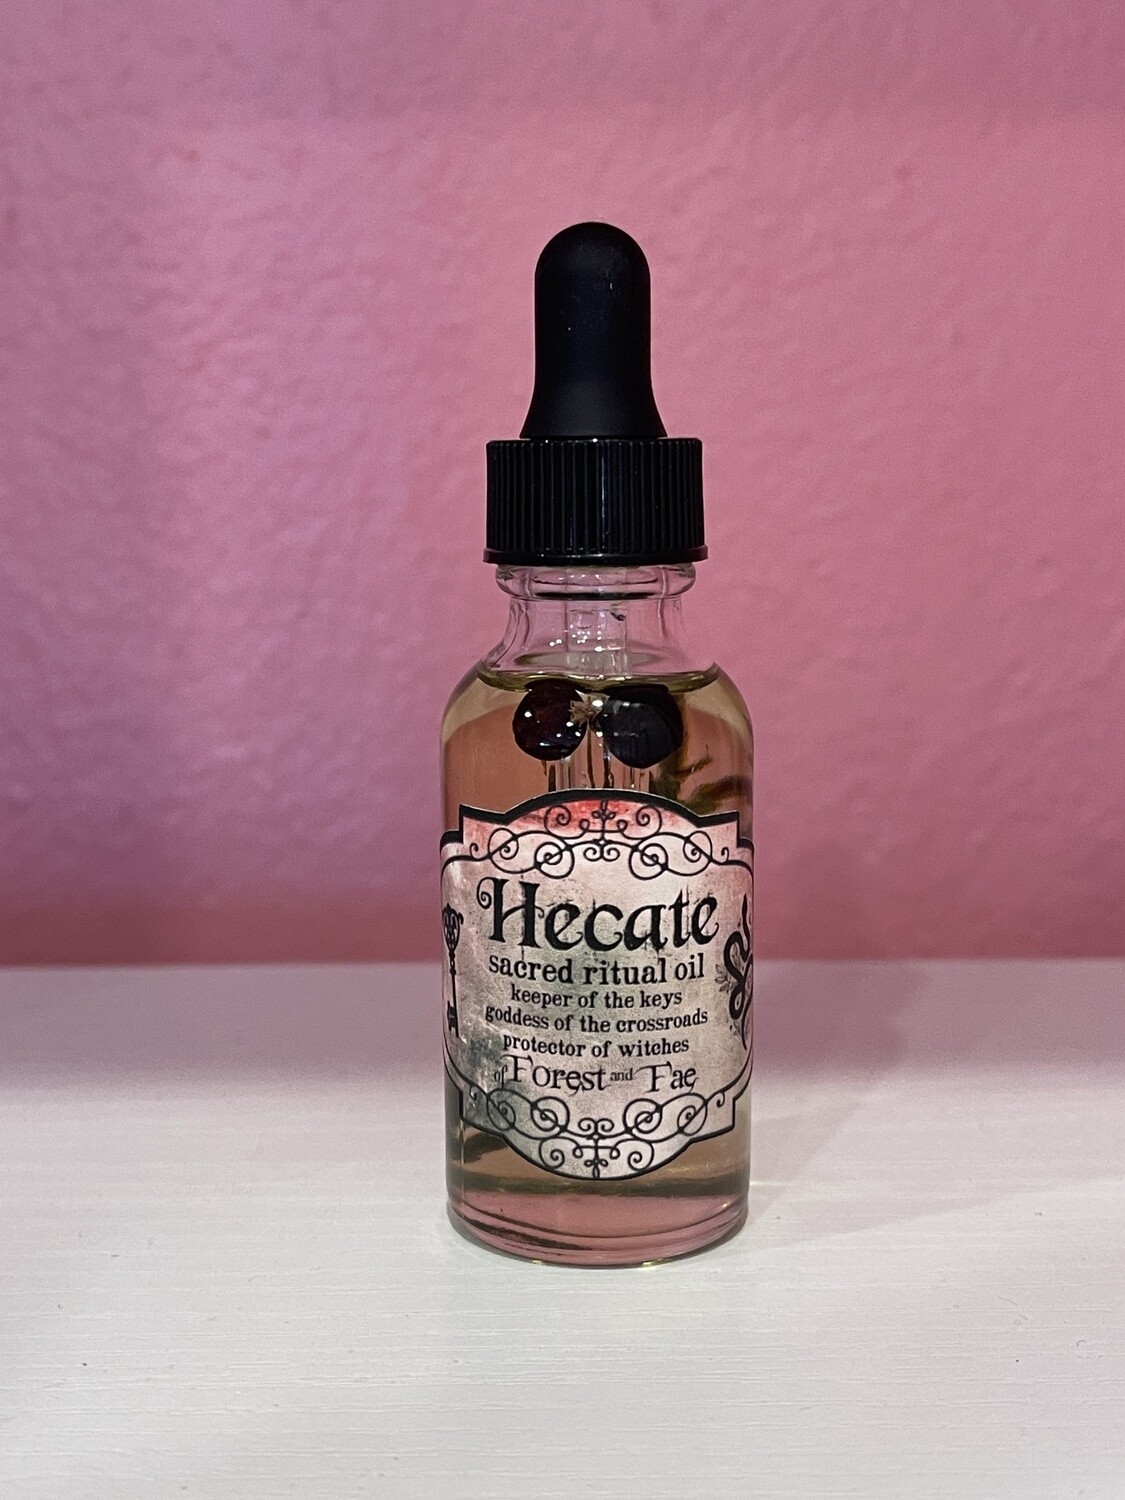 Hecate Sacred Ritual Oil | Altar Oil | Spellcrafting | Witchcraft | Hekate | Candle Dressing Oil | Pagan | Protection Oil | Crossroads